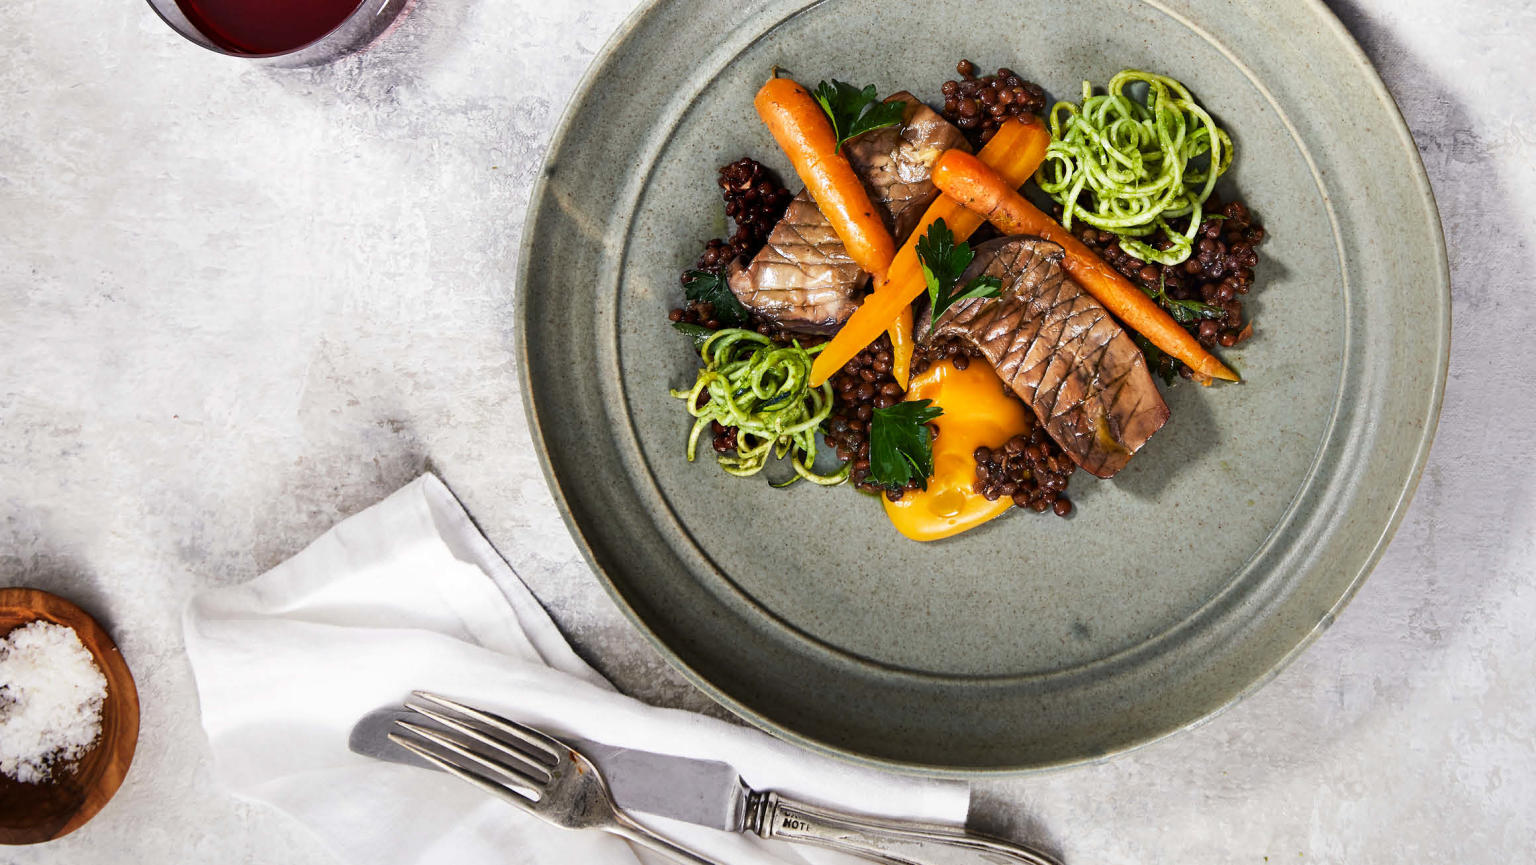 Bird's eye view of a delicious steak and vegetable dish presented on a table.